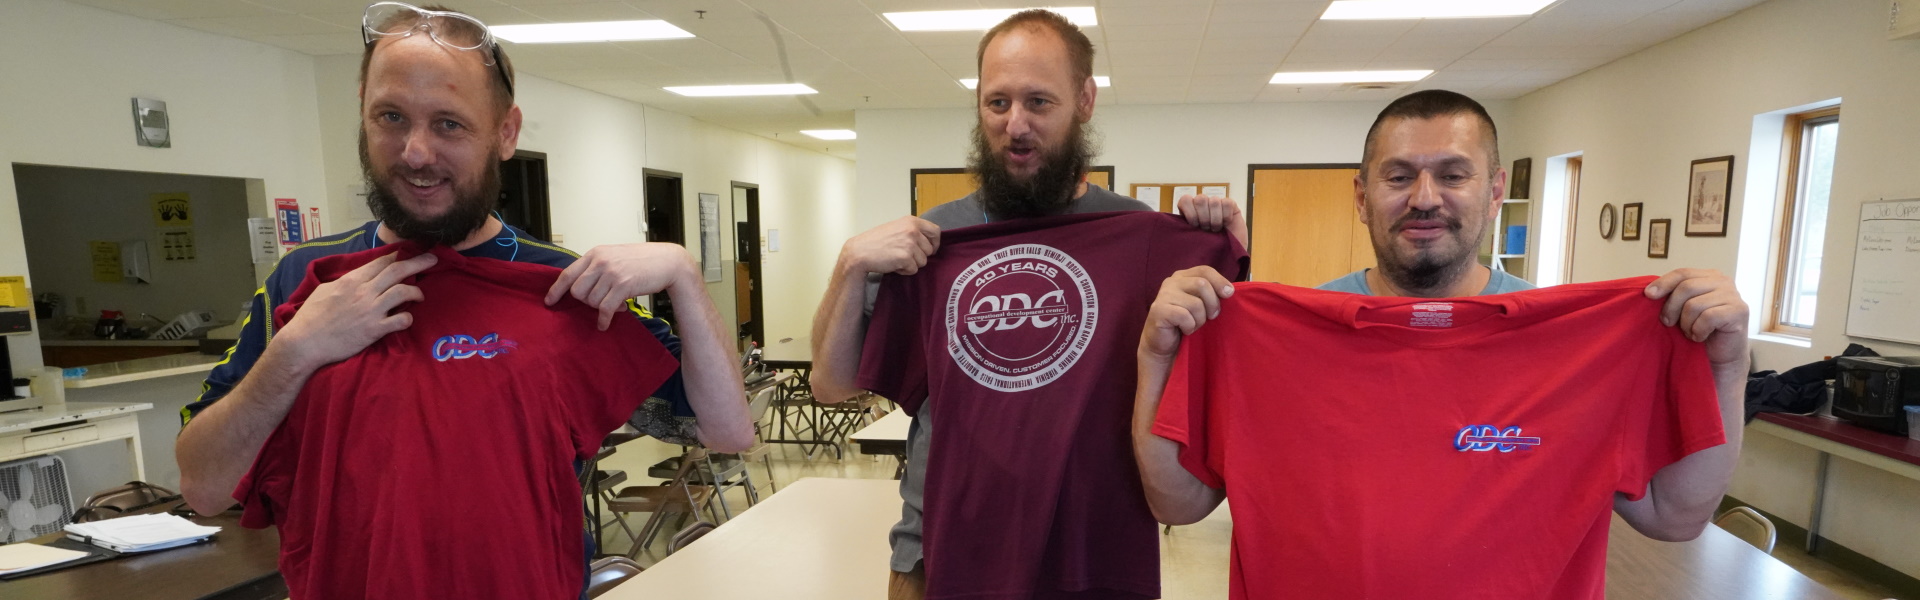 ODC team members showing off their new apparel